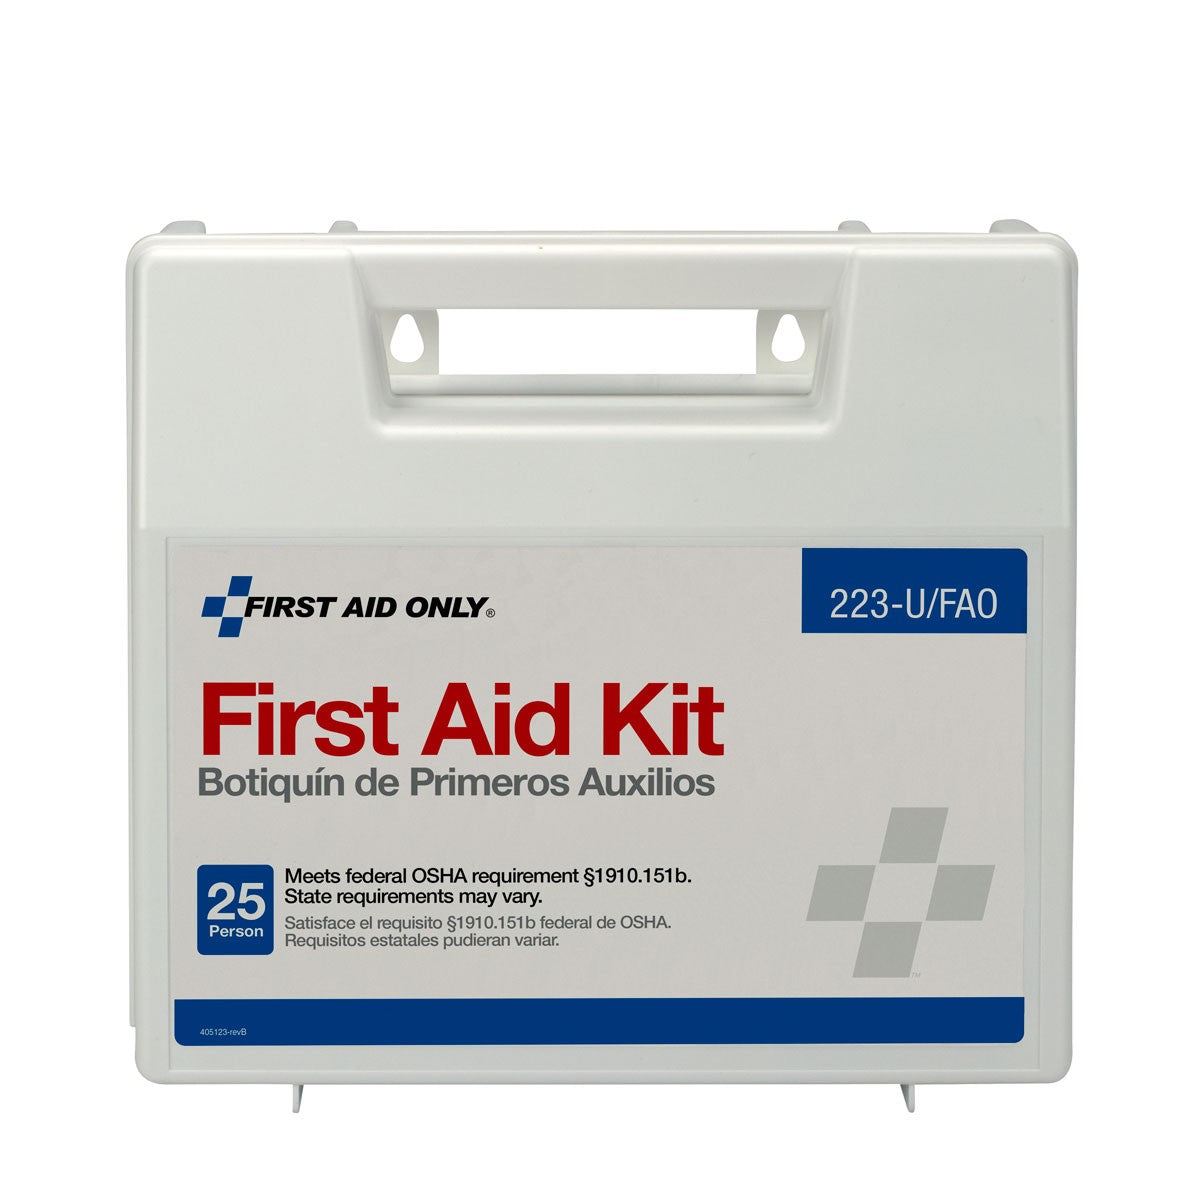 25 Person First Aid Kit, Plastic Case With Dividers - W-223-U/FAO